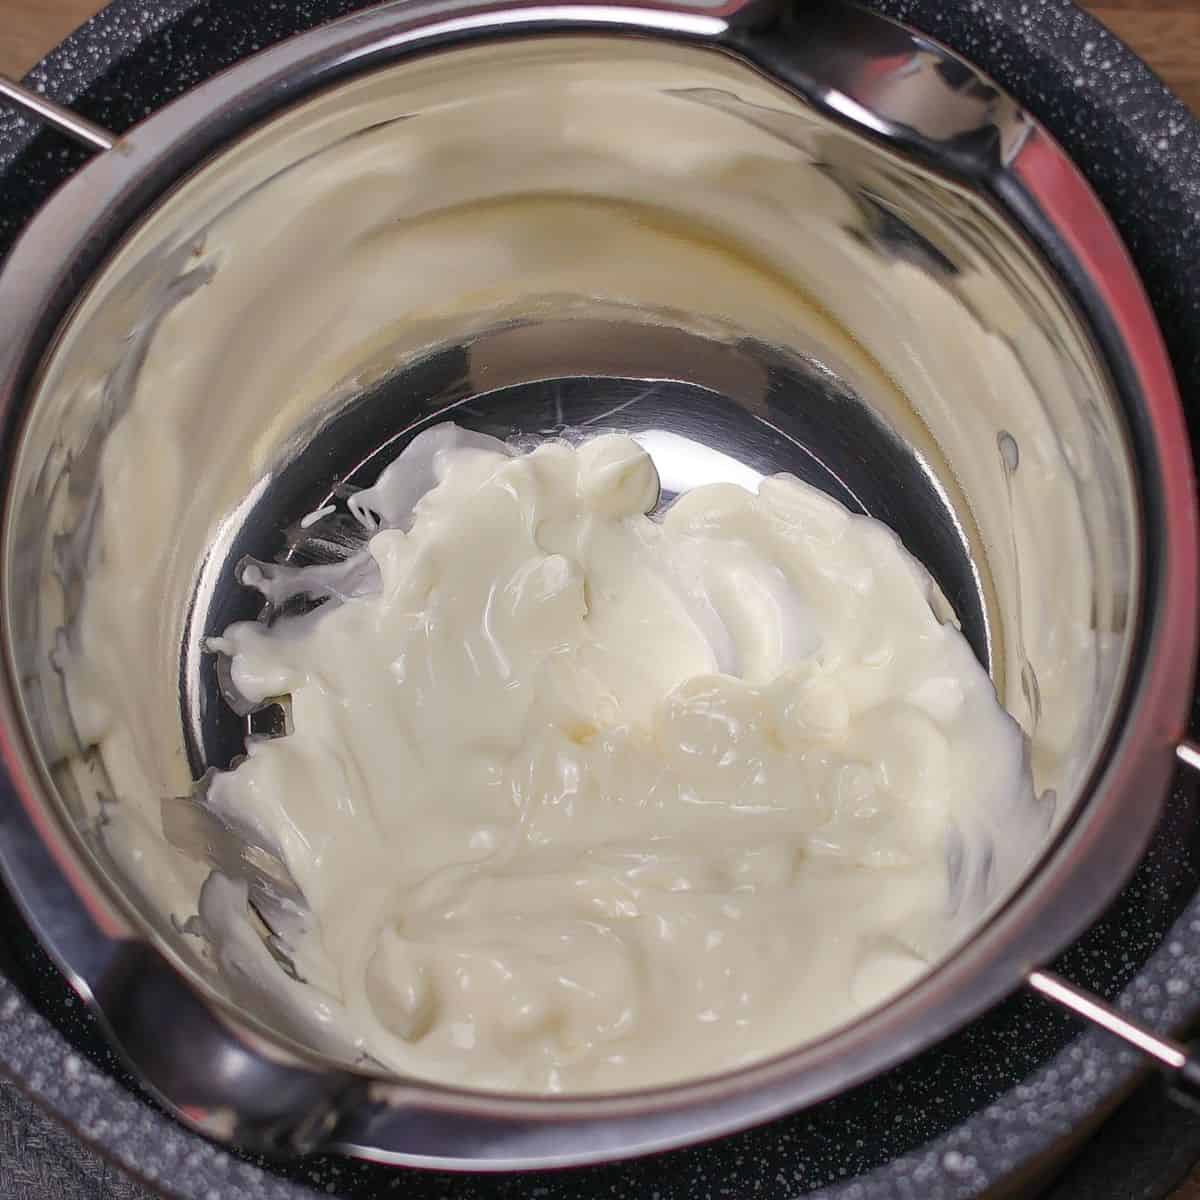 Melted white chocolate in a stainless steel bowl set over a pot of simmering water, illustrating the double boiler method for melting chocolate.